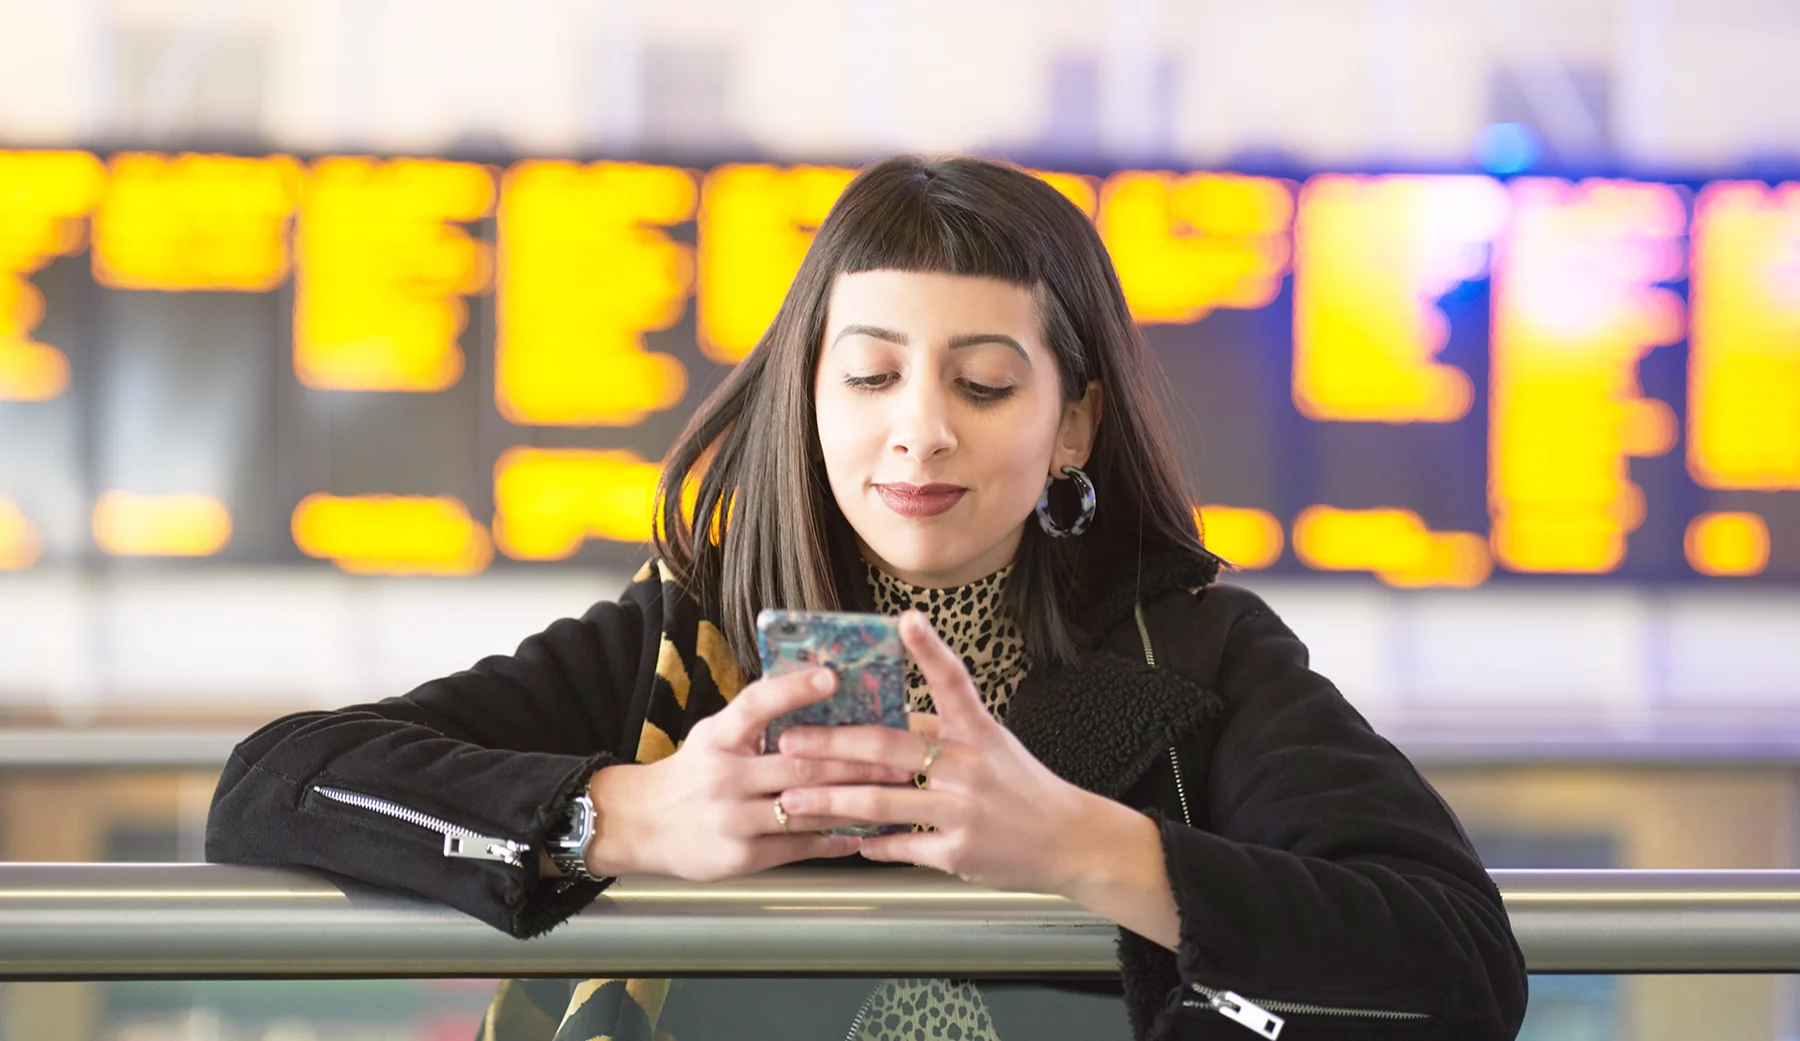 A woman with olive skin and long dark hair with a blunt fringe looks at her mobile phone screen while standing in front of a large train station departure board.